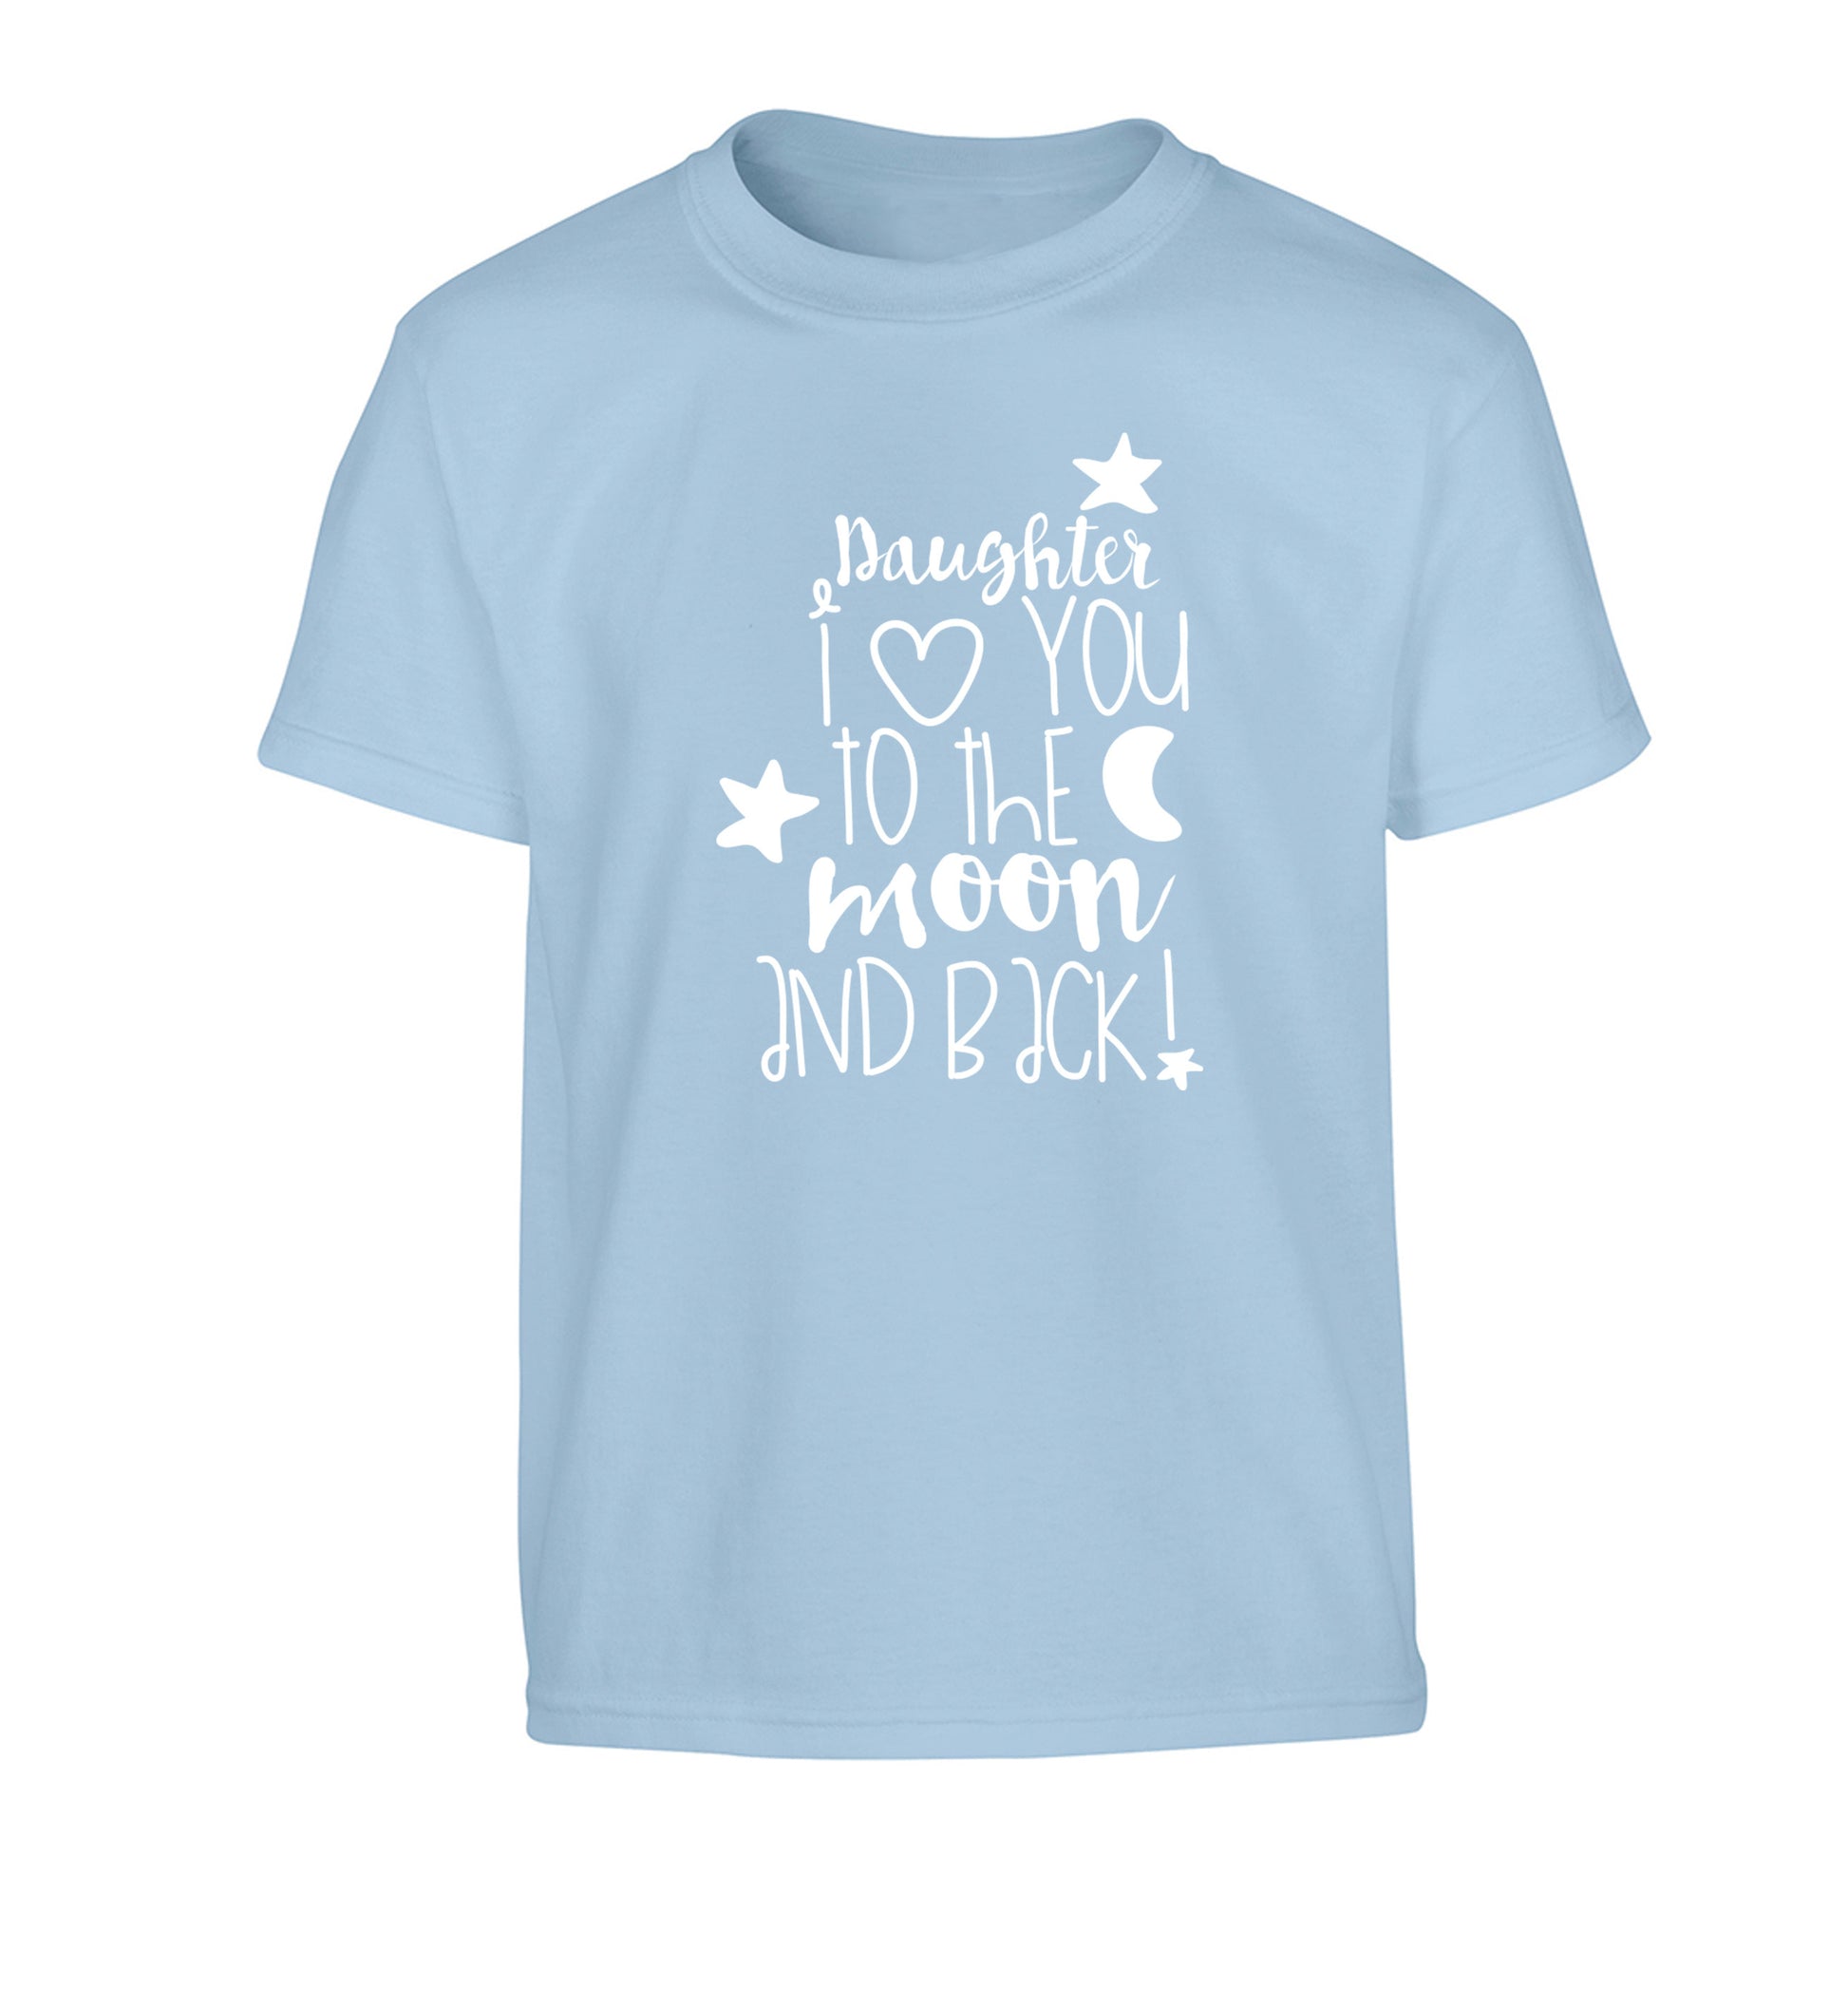 Daughter I love you to the moon and back Children's light blue Tshirt 12-14 Years